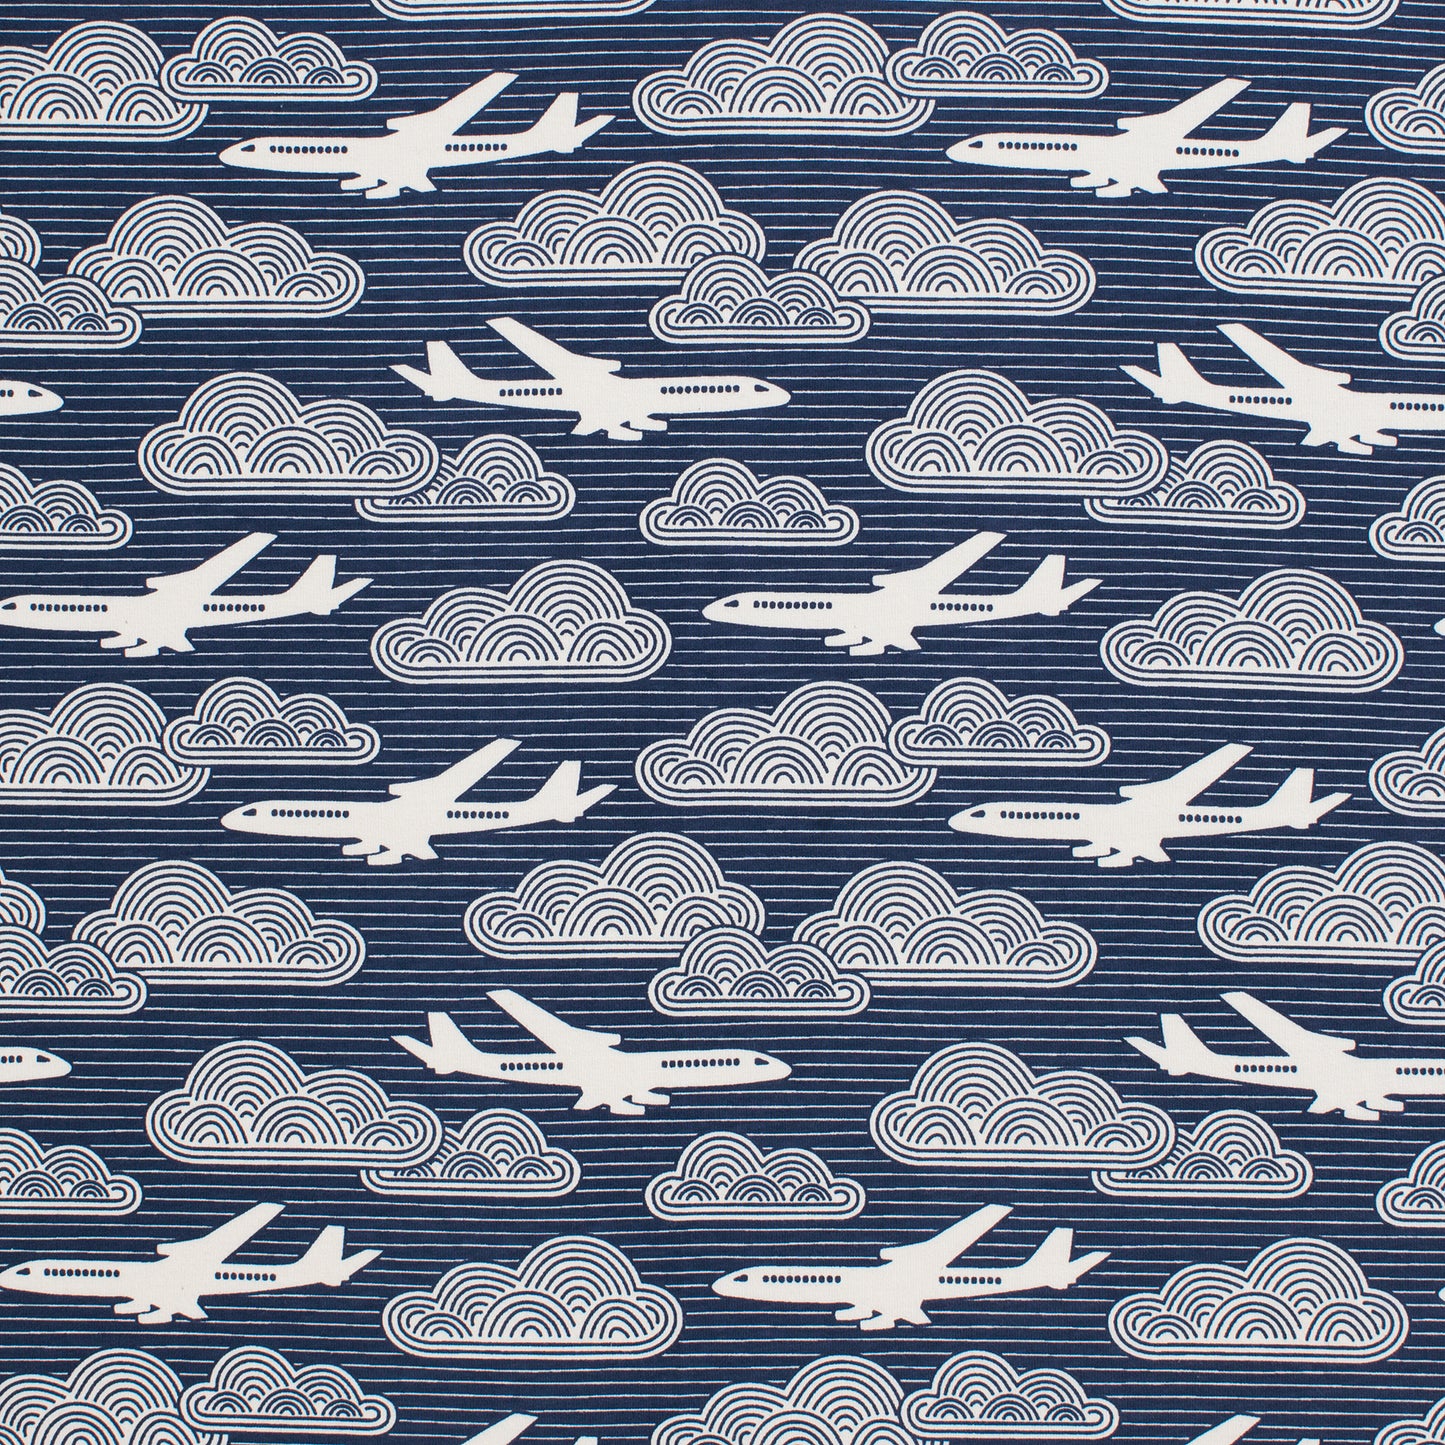 Long-Sleeve Lap Tee - In The Clouds Navy